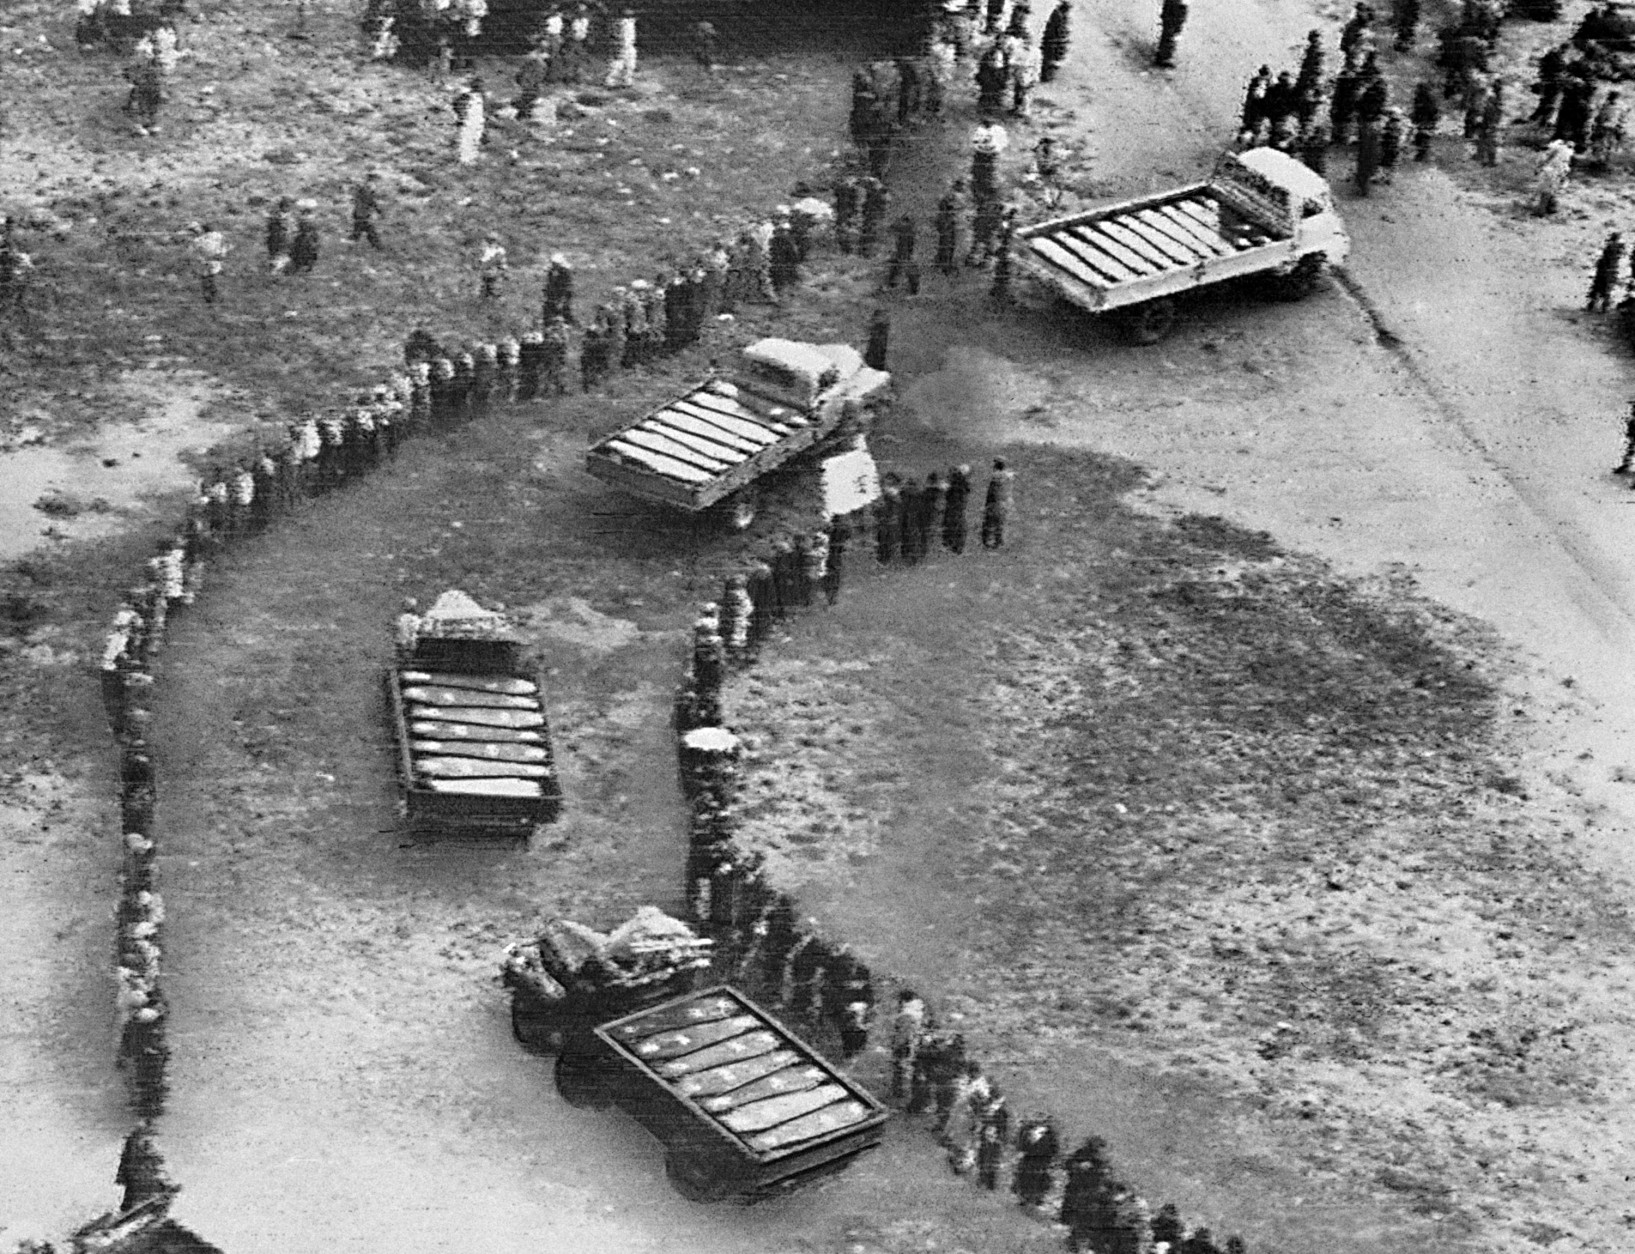 Trucks laden with coffins of black victims of South African shooting roll through lines of mourners during mass funeral ceremony at Sharpeville, south of Johannesburg, South Africa, March 21, 1960. No whites were permitted into the area during the funeral of 34 victims, who were killed by South African white police last week. (AP Photo)